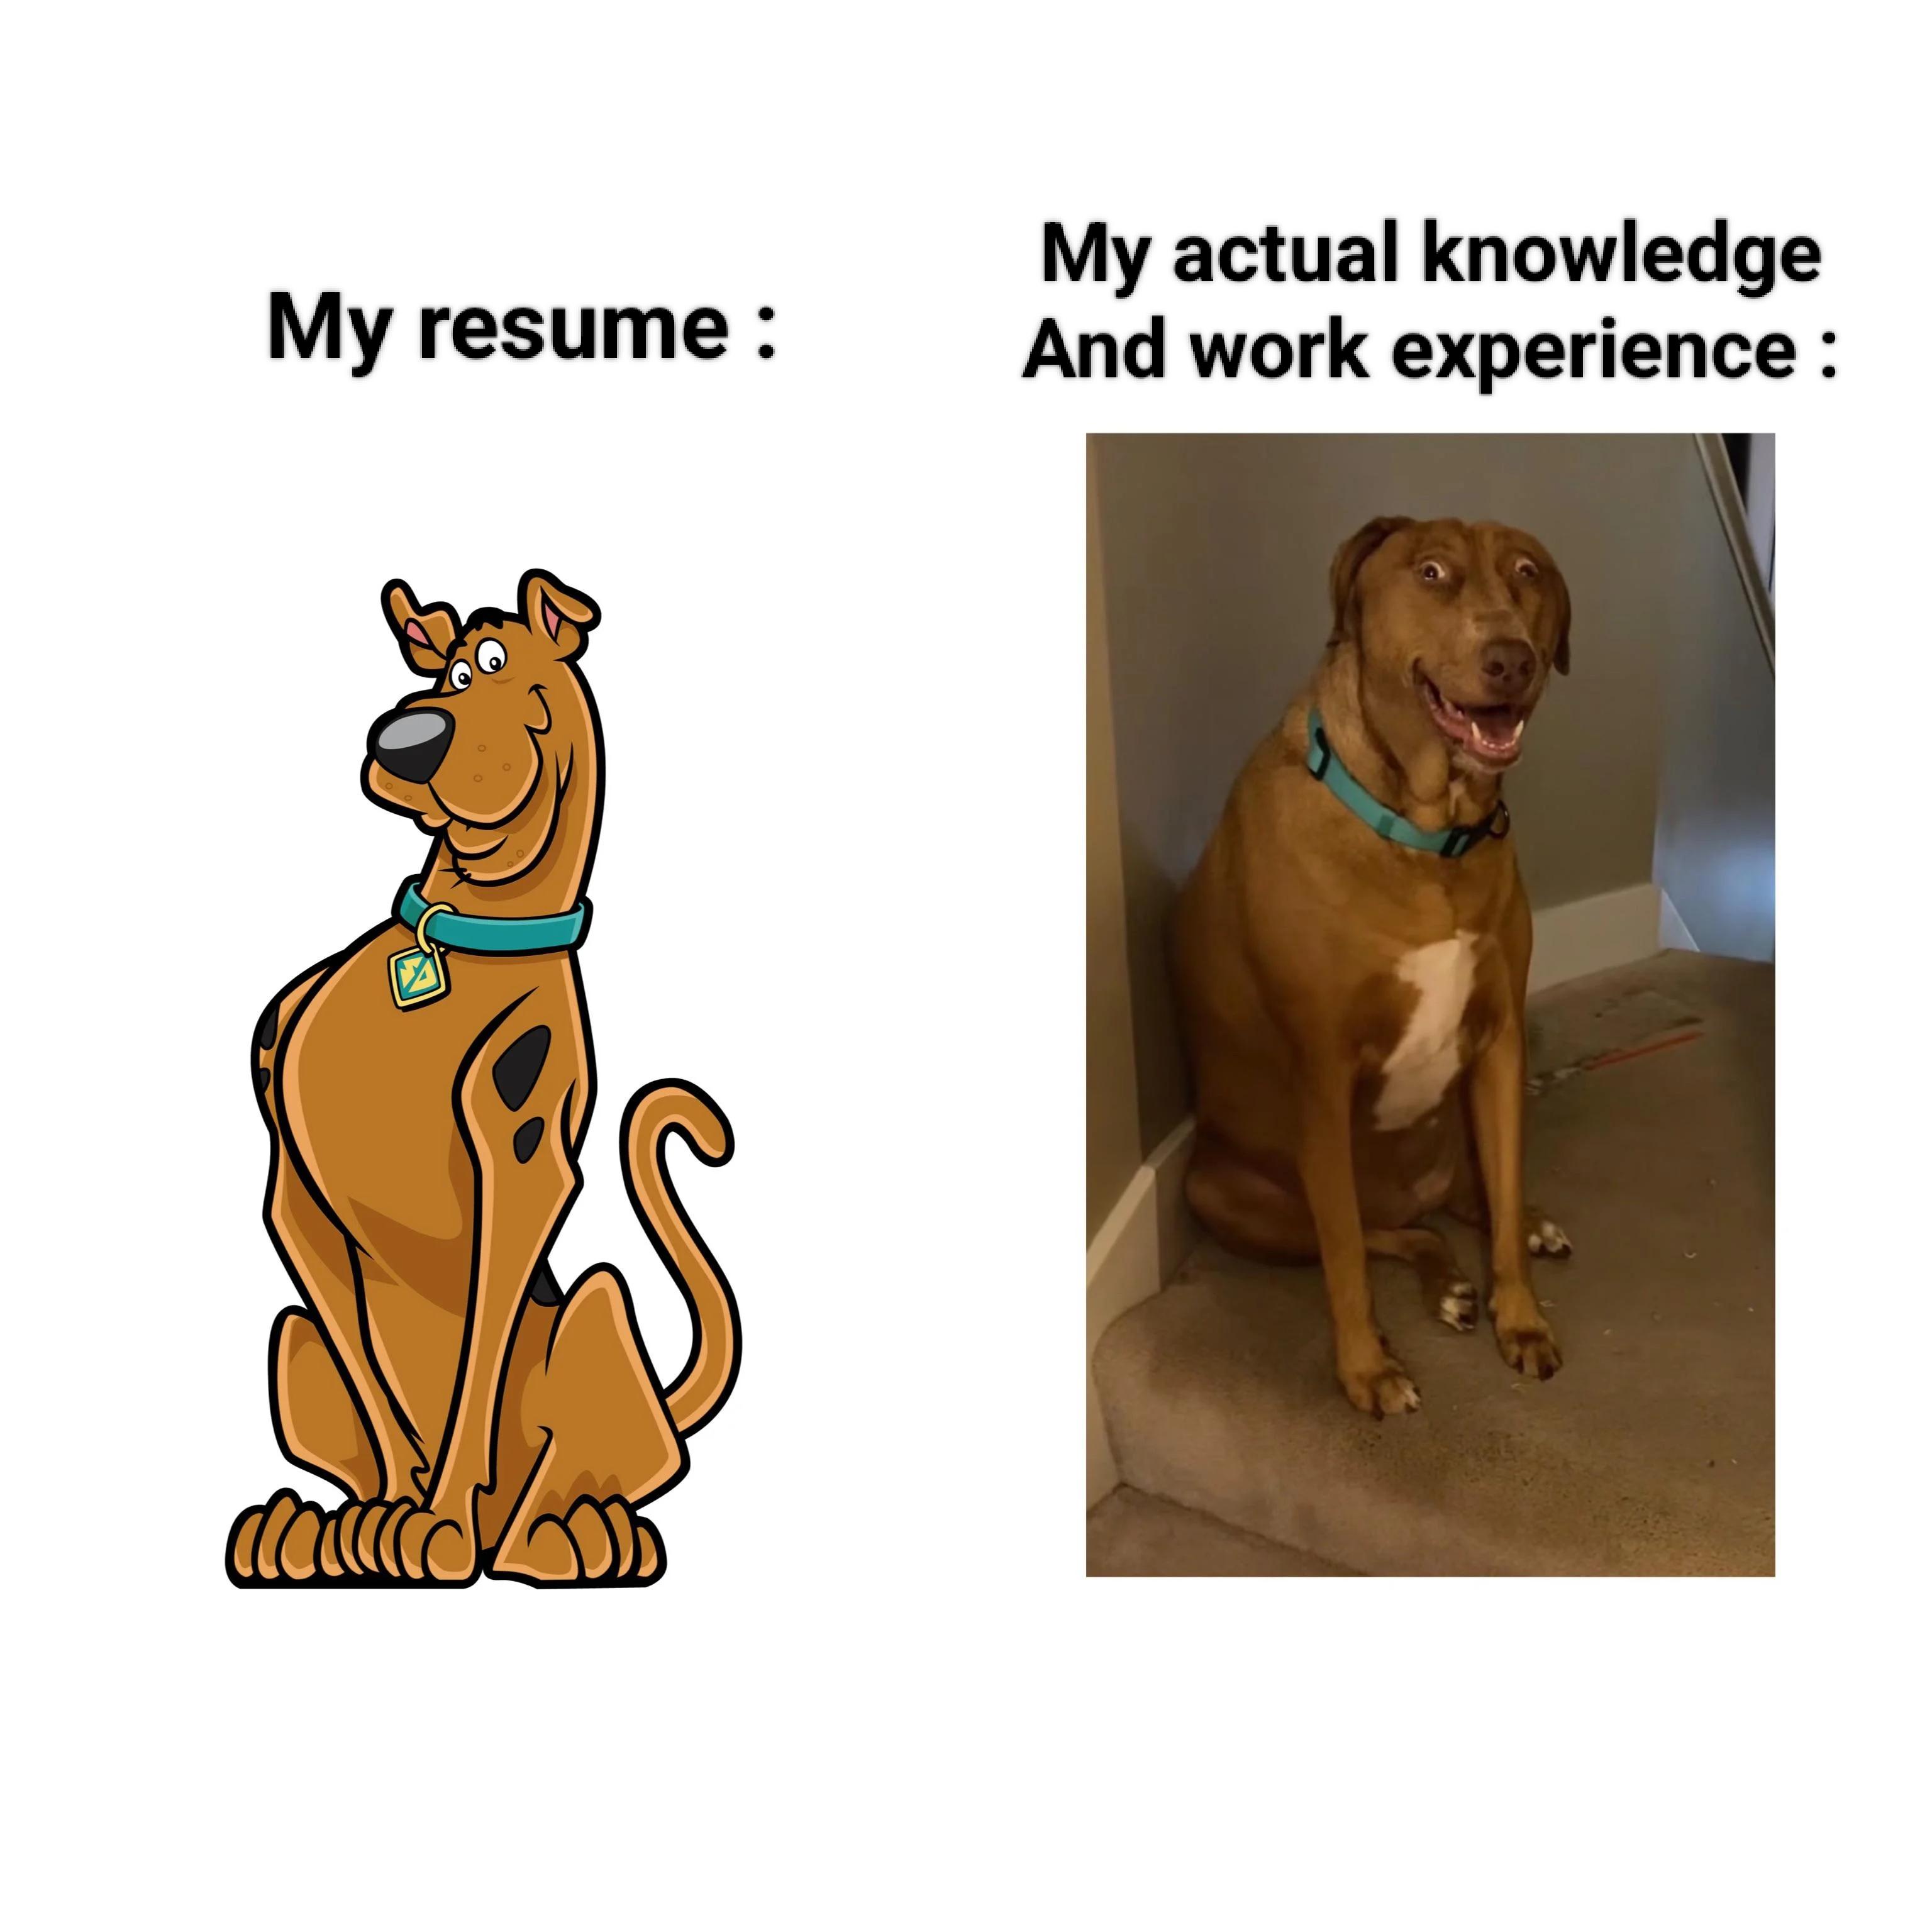 daily dose of randoms - like zoinks scoob meme - My resume b My actual knowlege And work experience